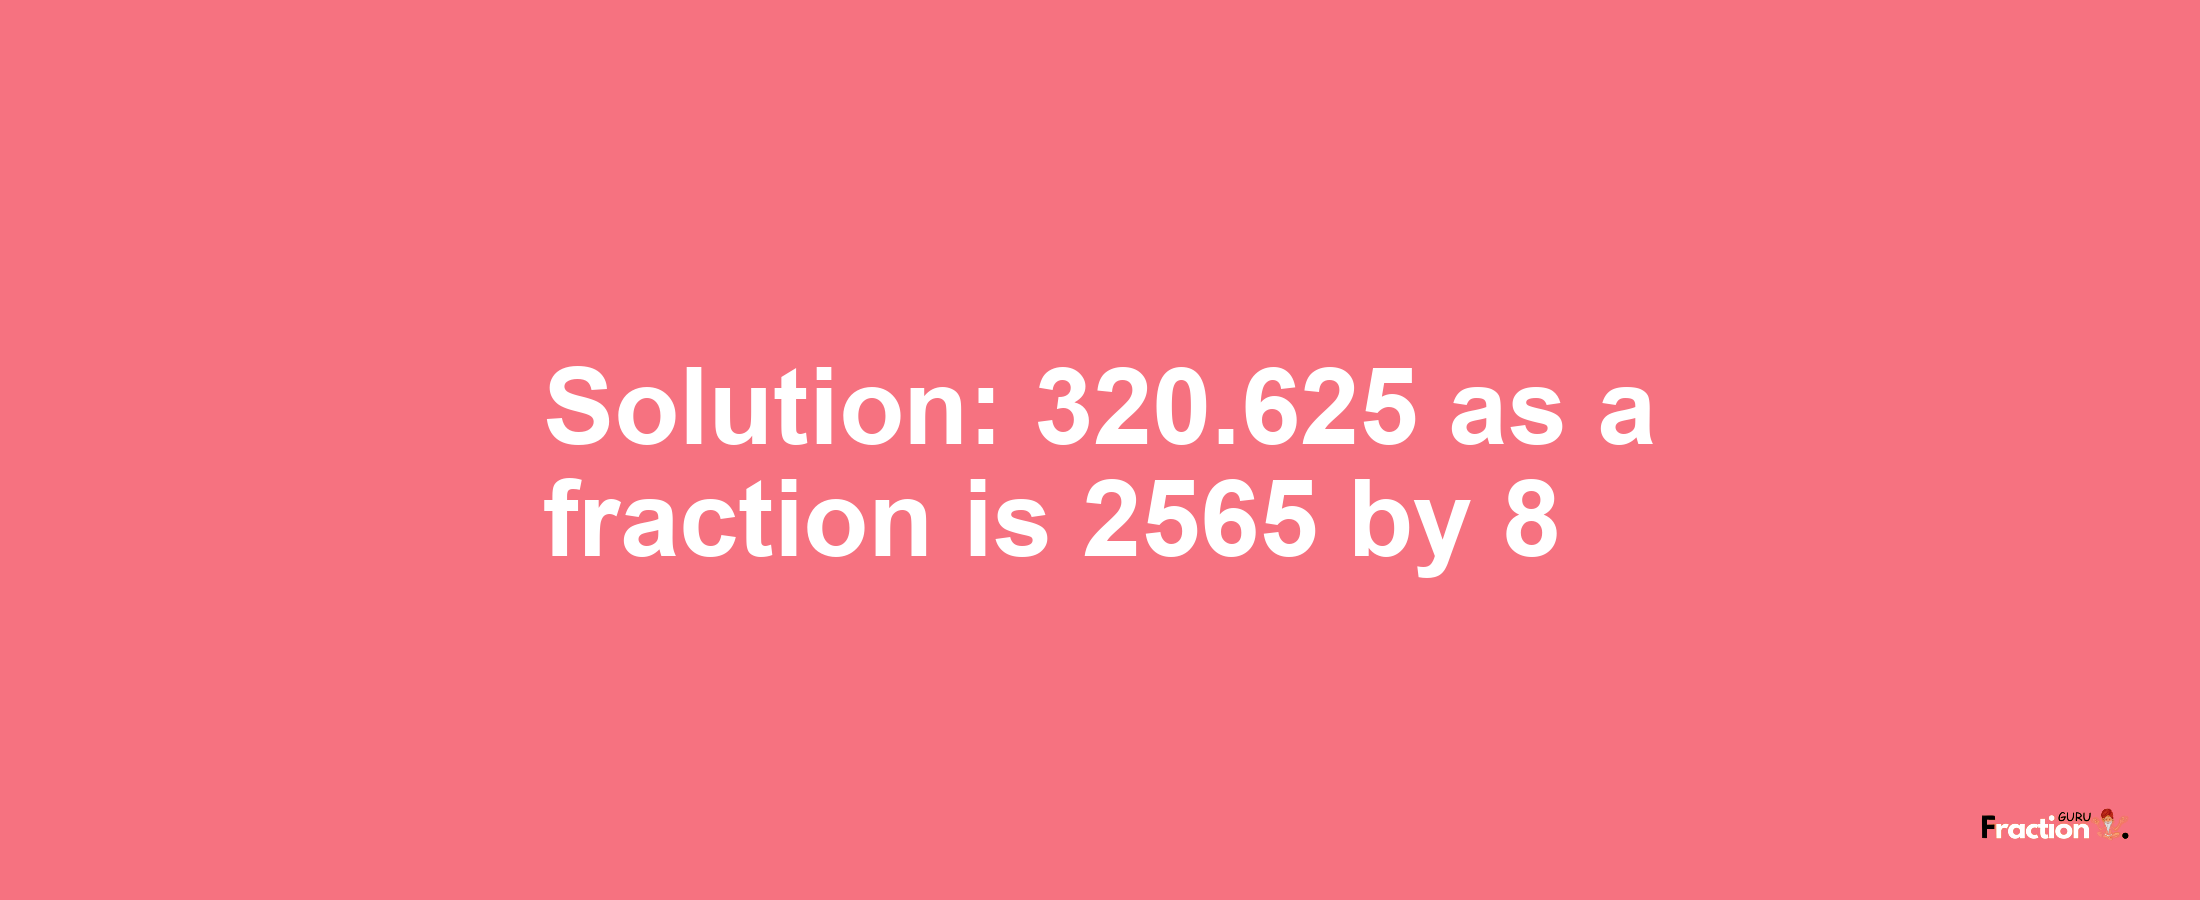 Solution:320.625 as a fraction is 2565/8